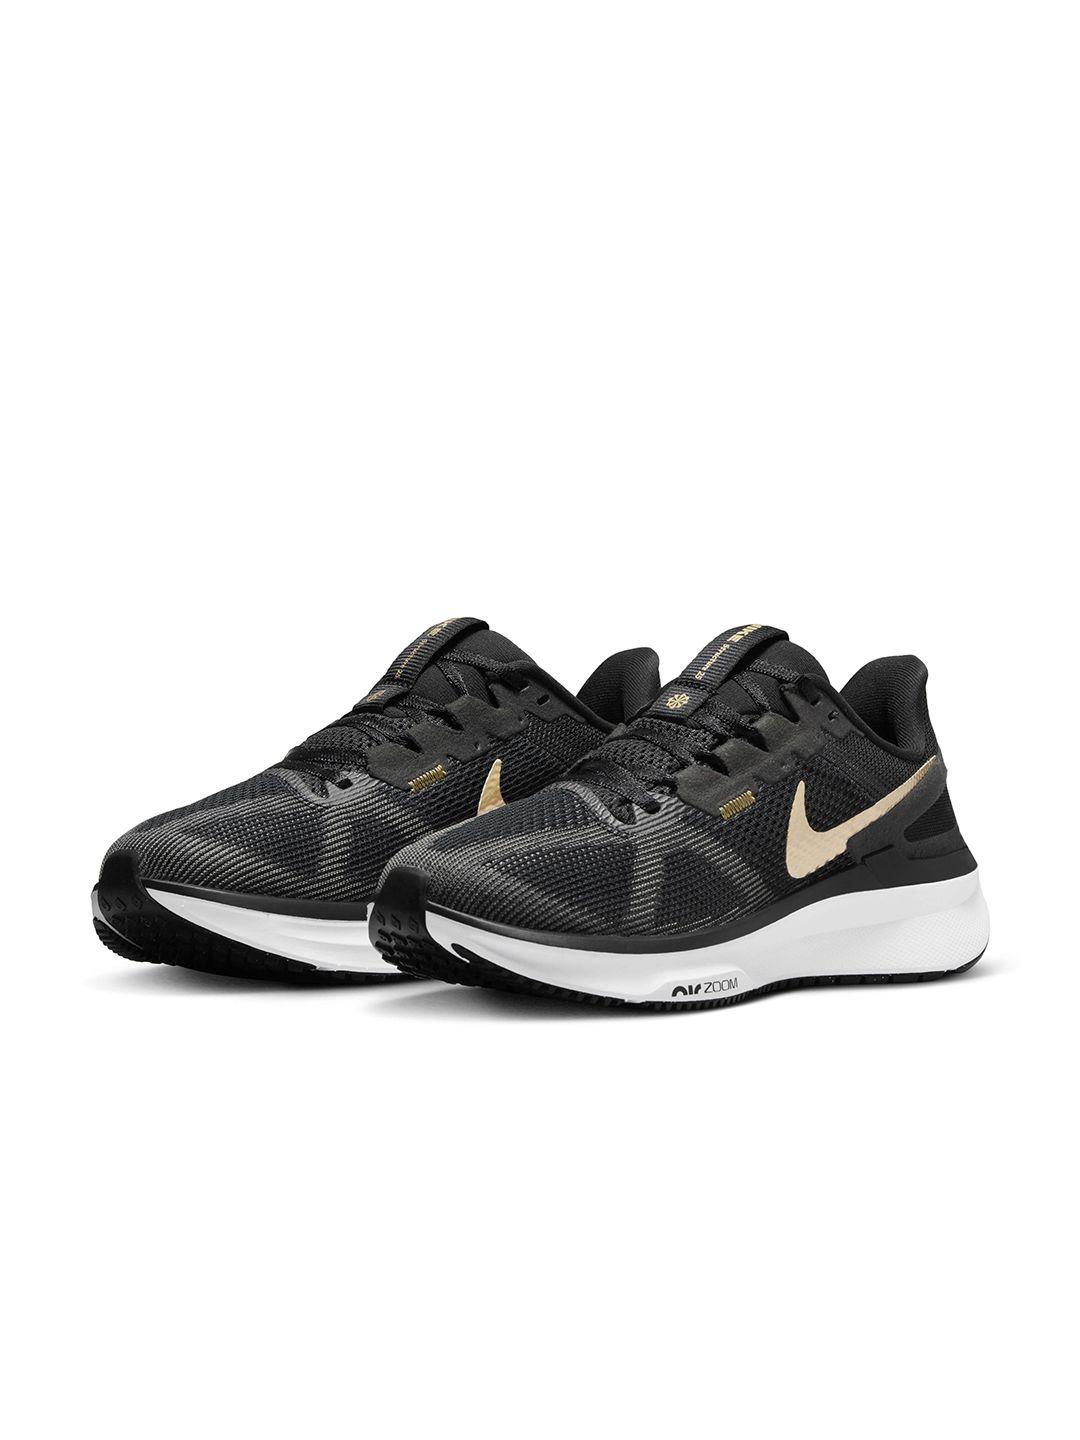 nike women textured road running sports shoes